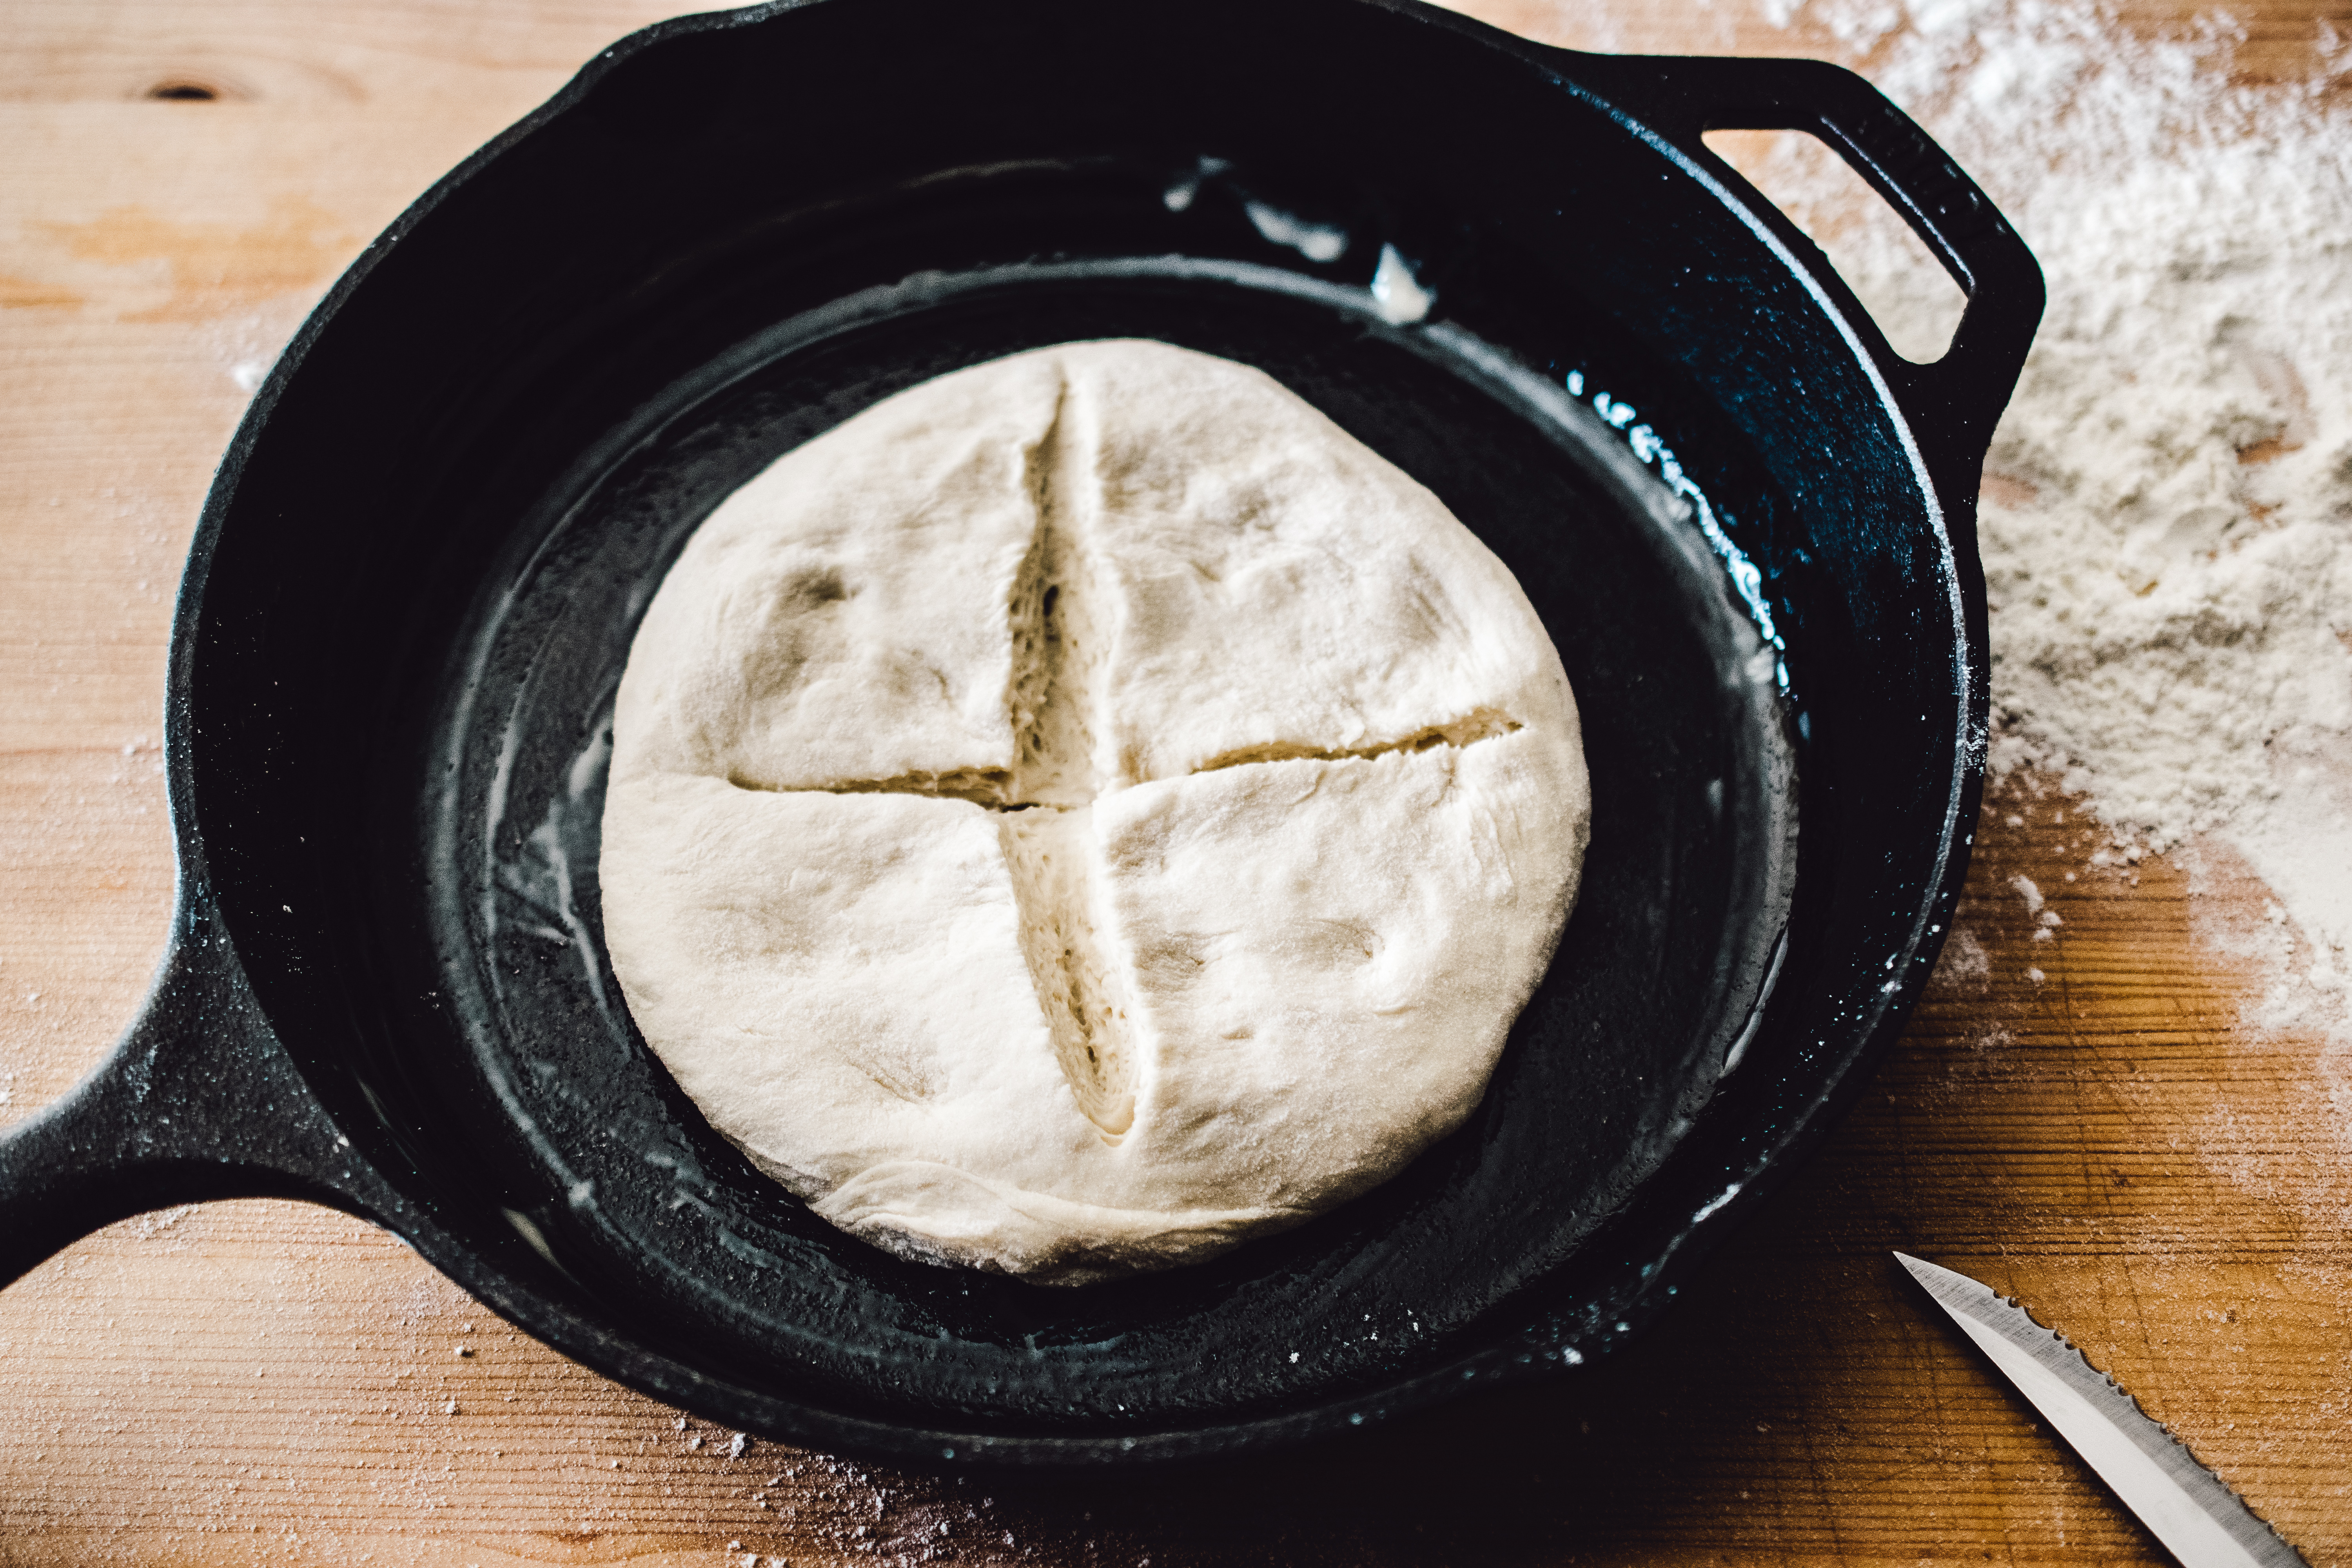 Homemade raw bread dough, formed into boule shape, laying in greased cast iron skillet, with an x slit in the top